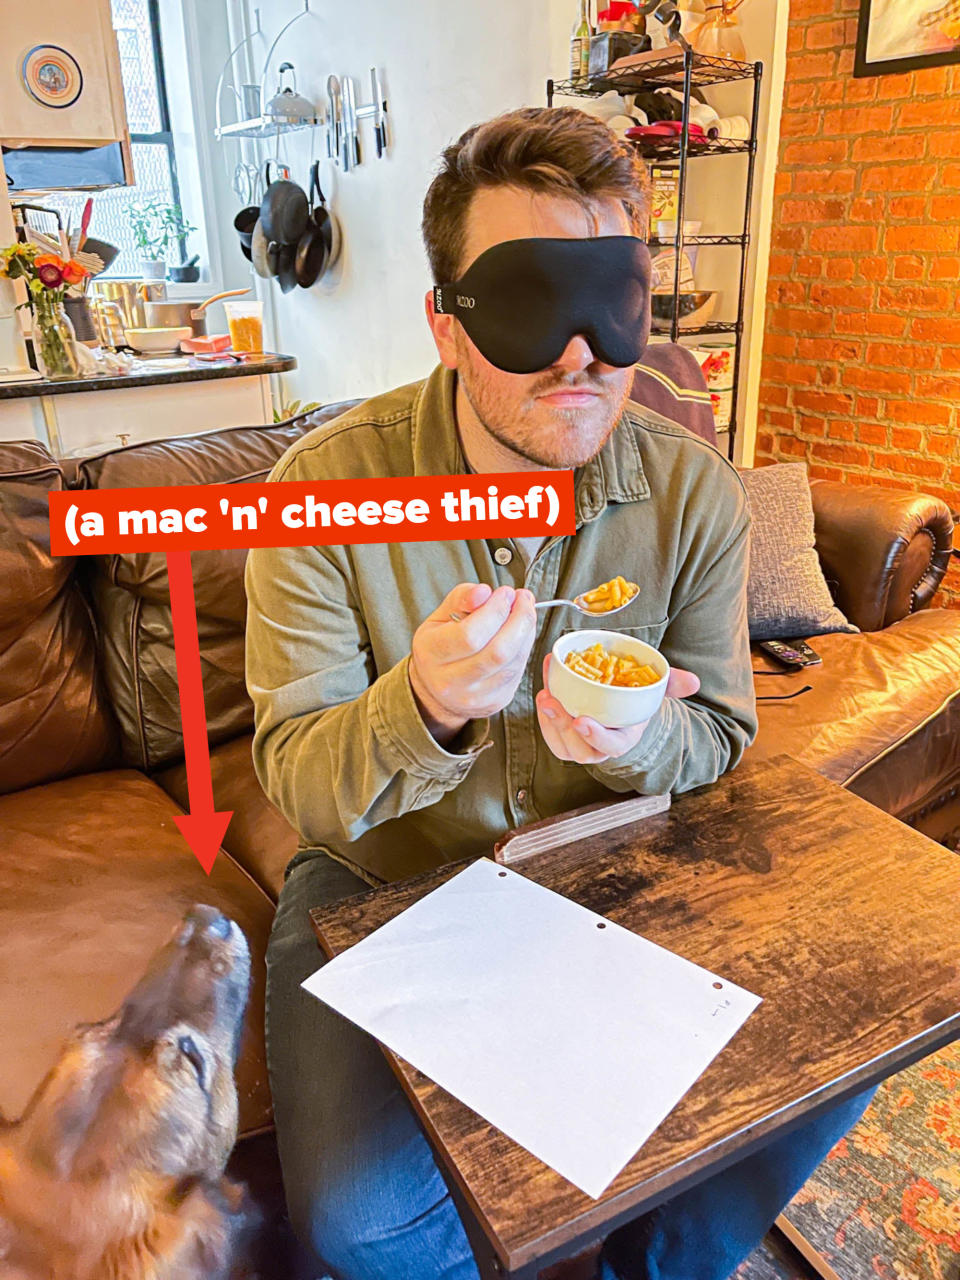 Arrow pointing to author's dog with text "a mac n cheese thief" while the author eats a bowl of mac 'n' cheese with a blindfold on